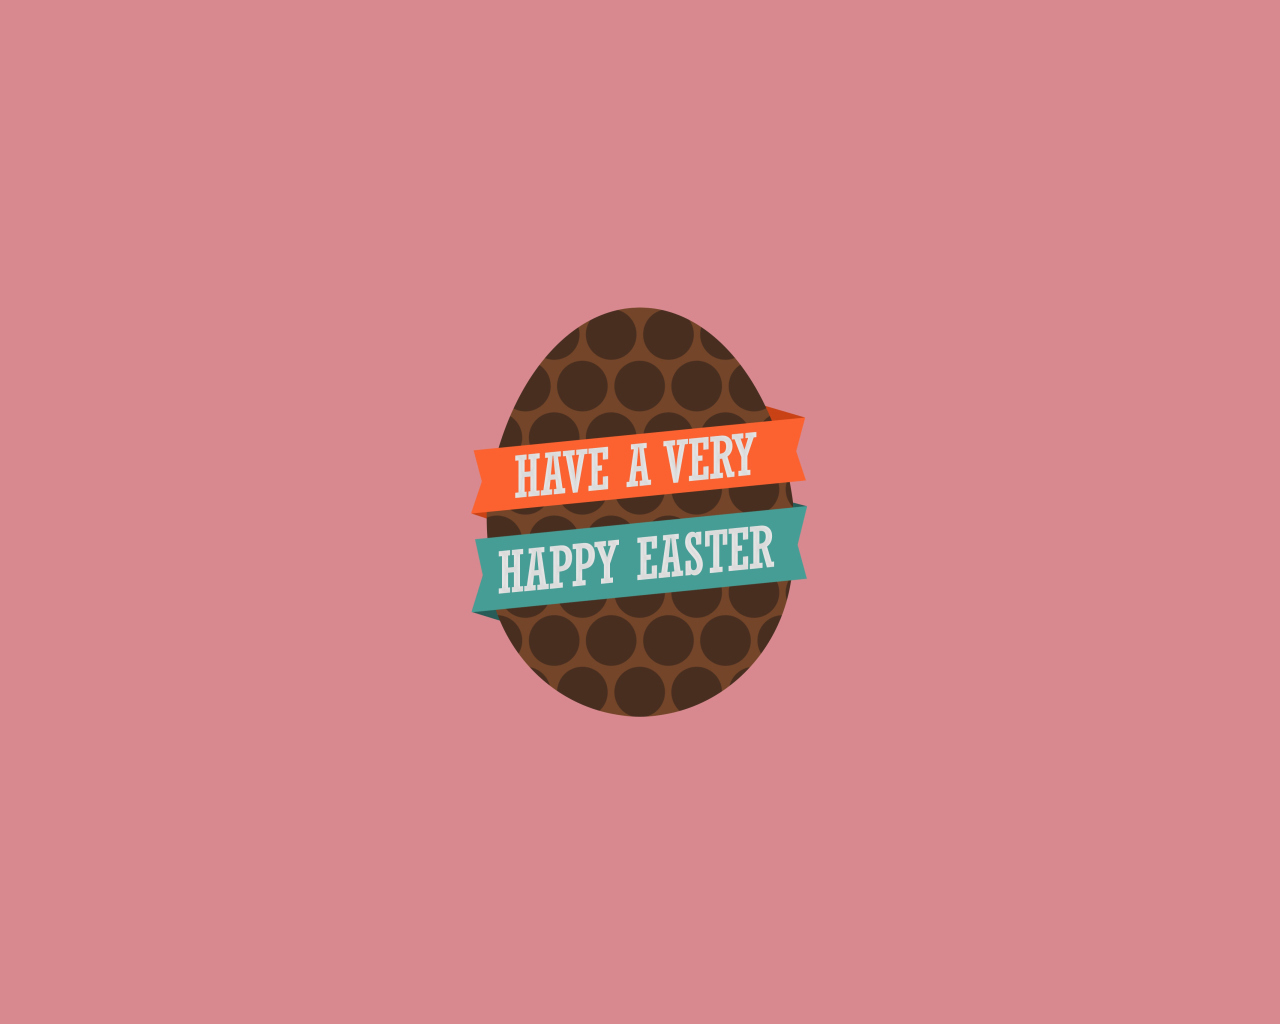 Very Happy Easter Egg wallpaper 1280x1024